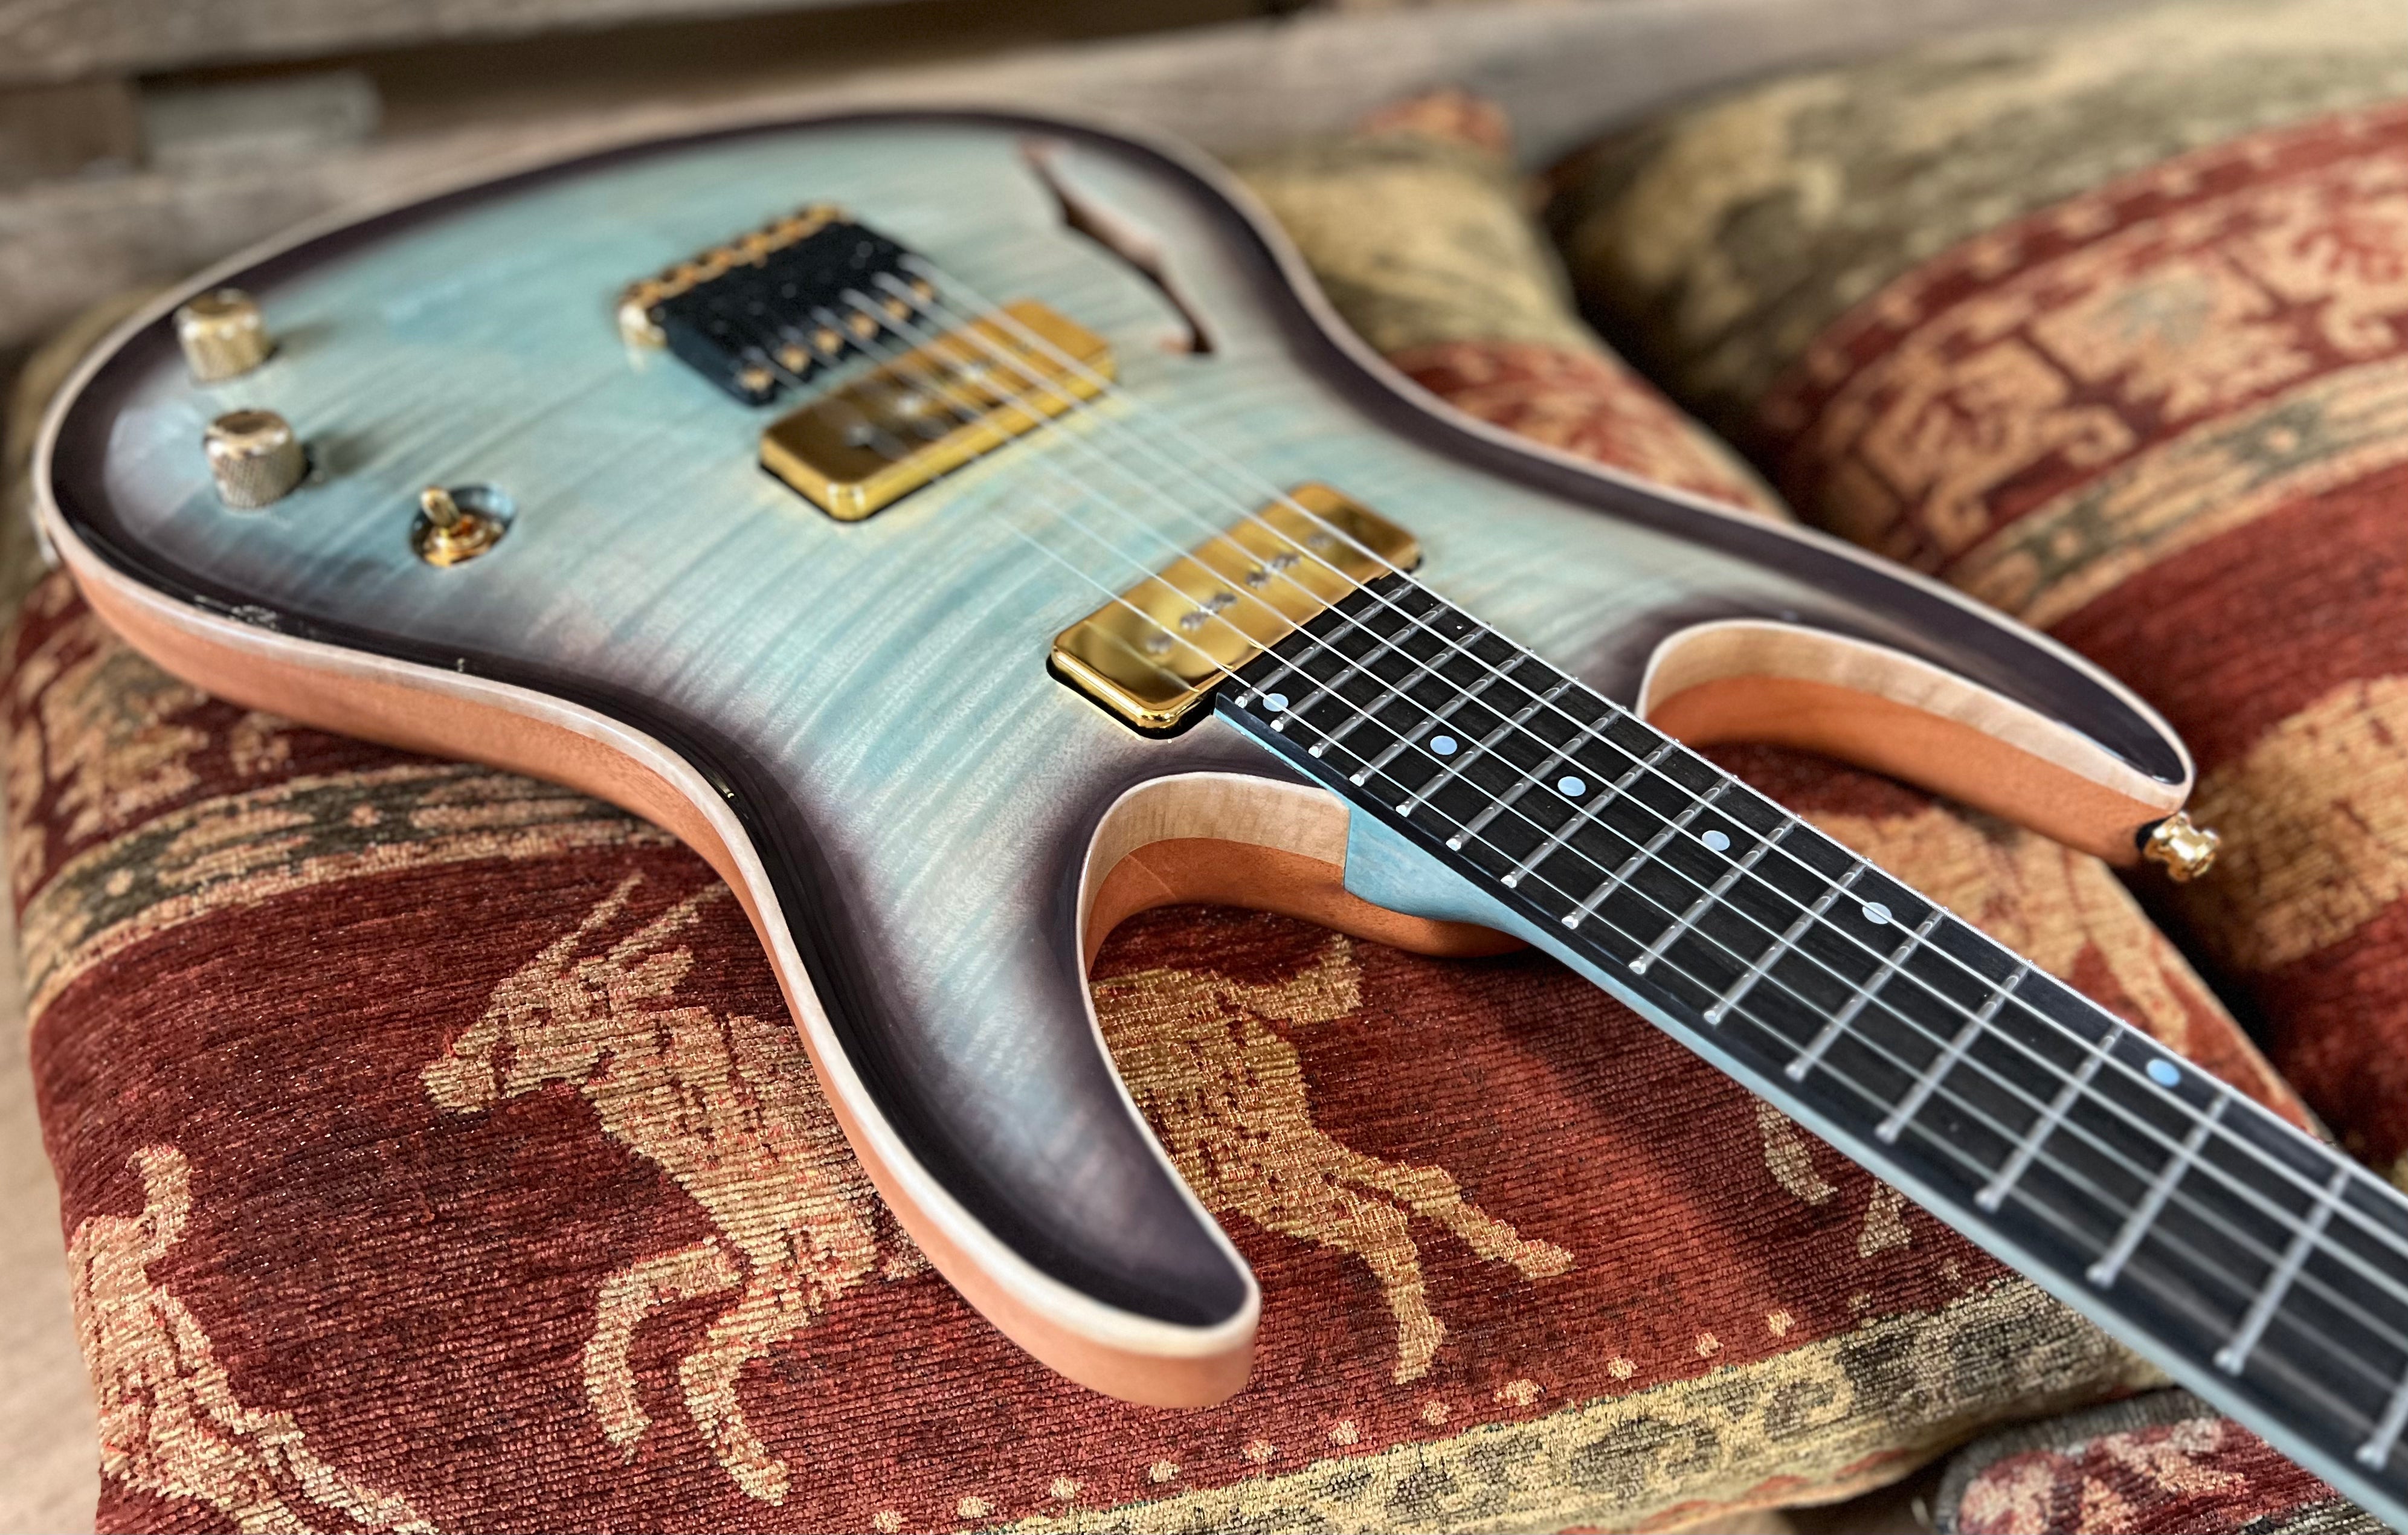 Valenti Nebula Carved Semi Hollow P90, Electric Guitar for sale at Richards Guitars.